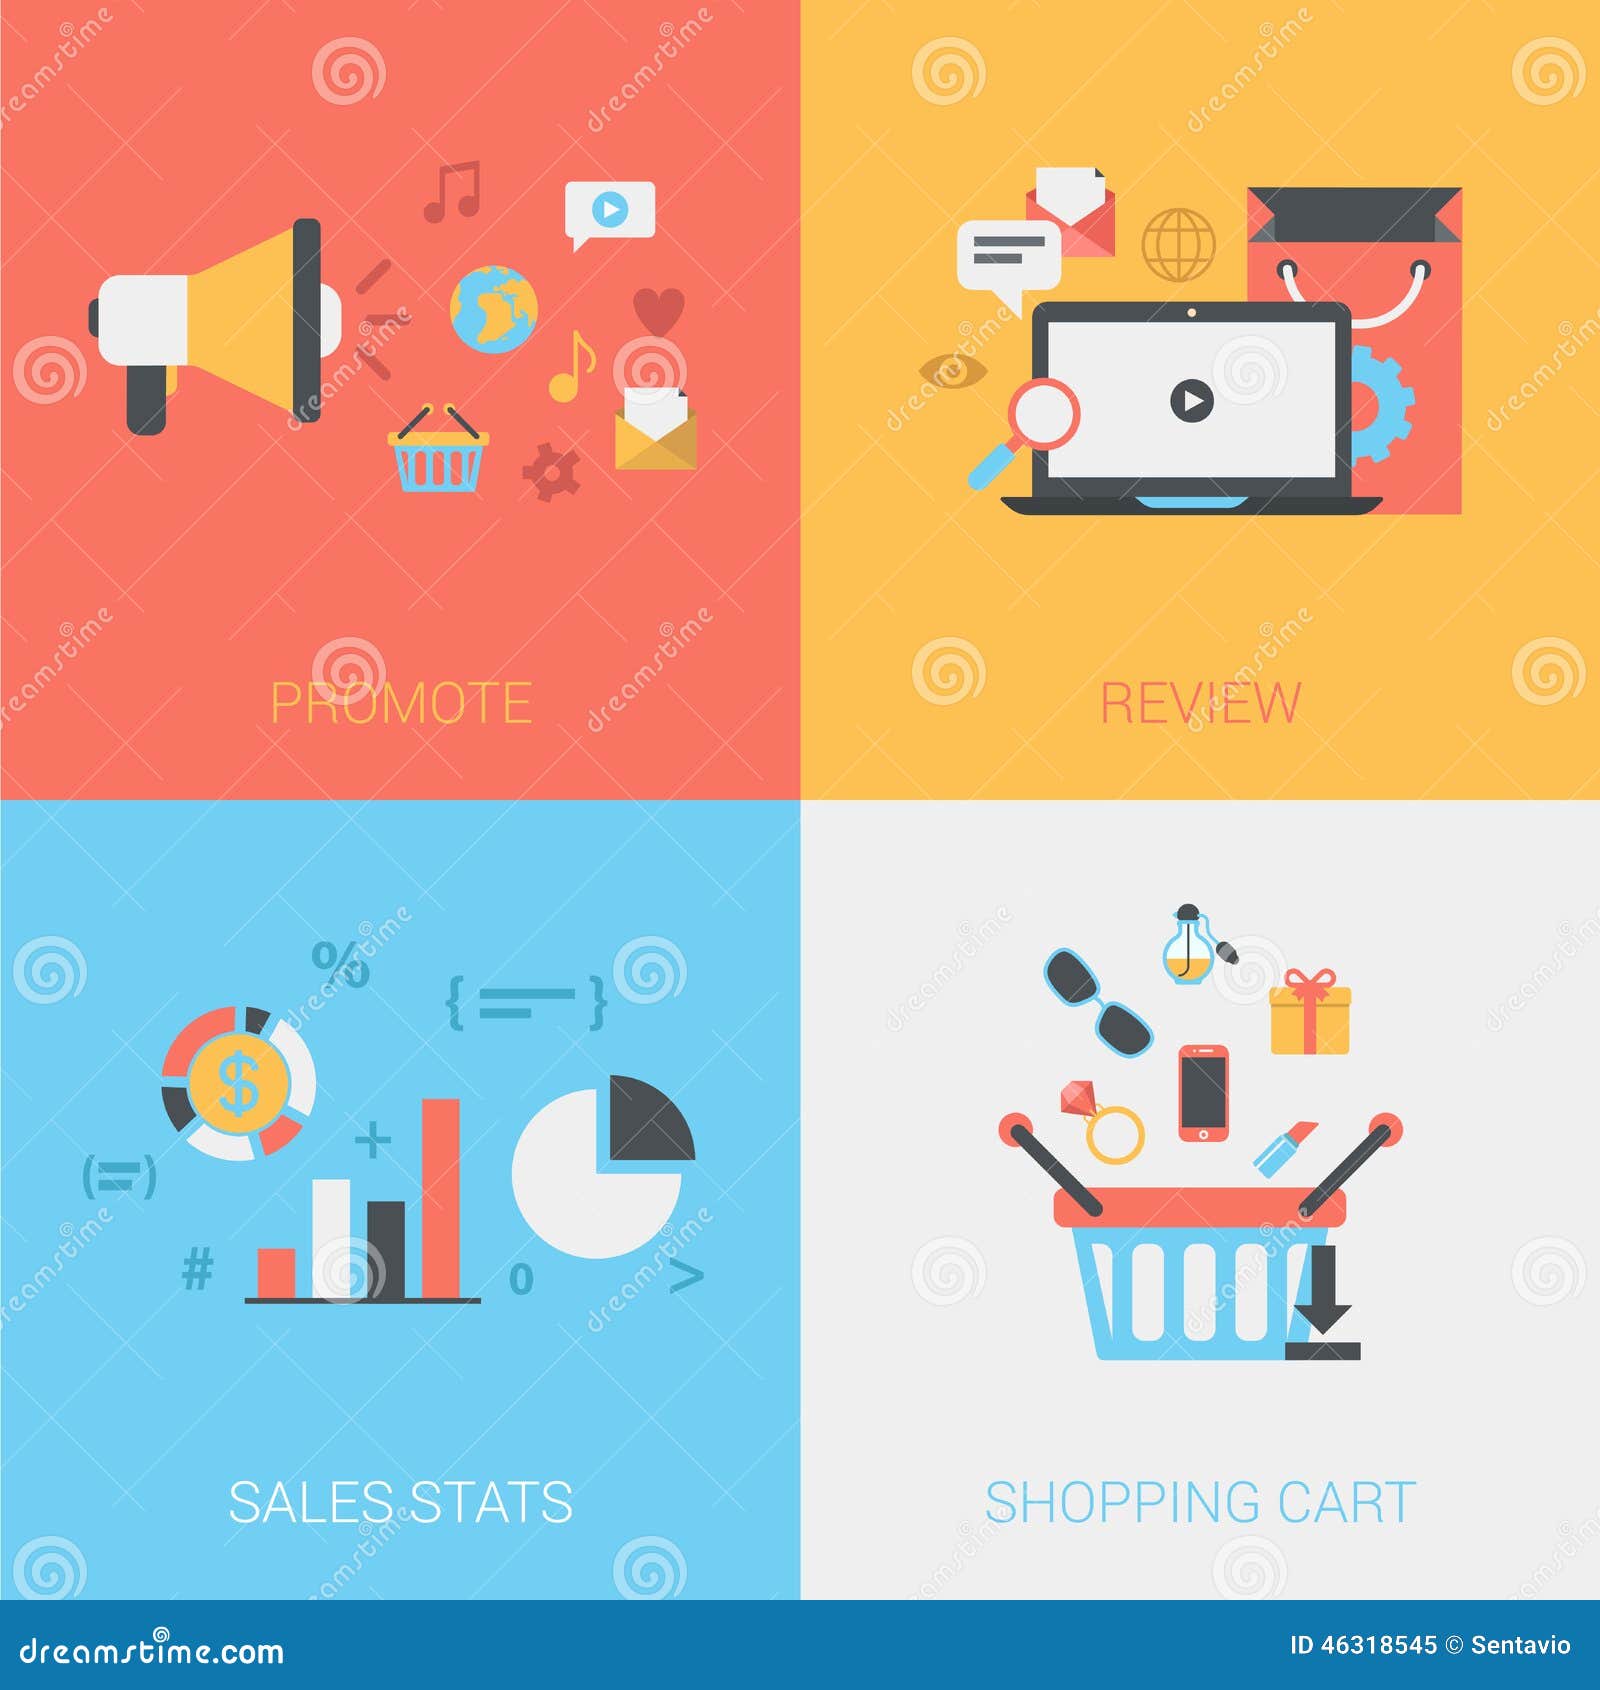 flat promote, review goods, sales stats, shopping cart 